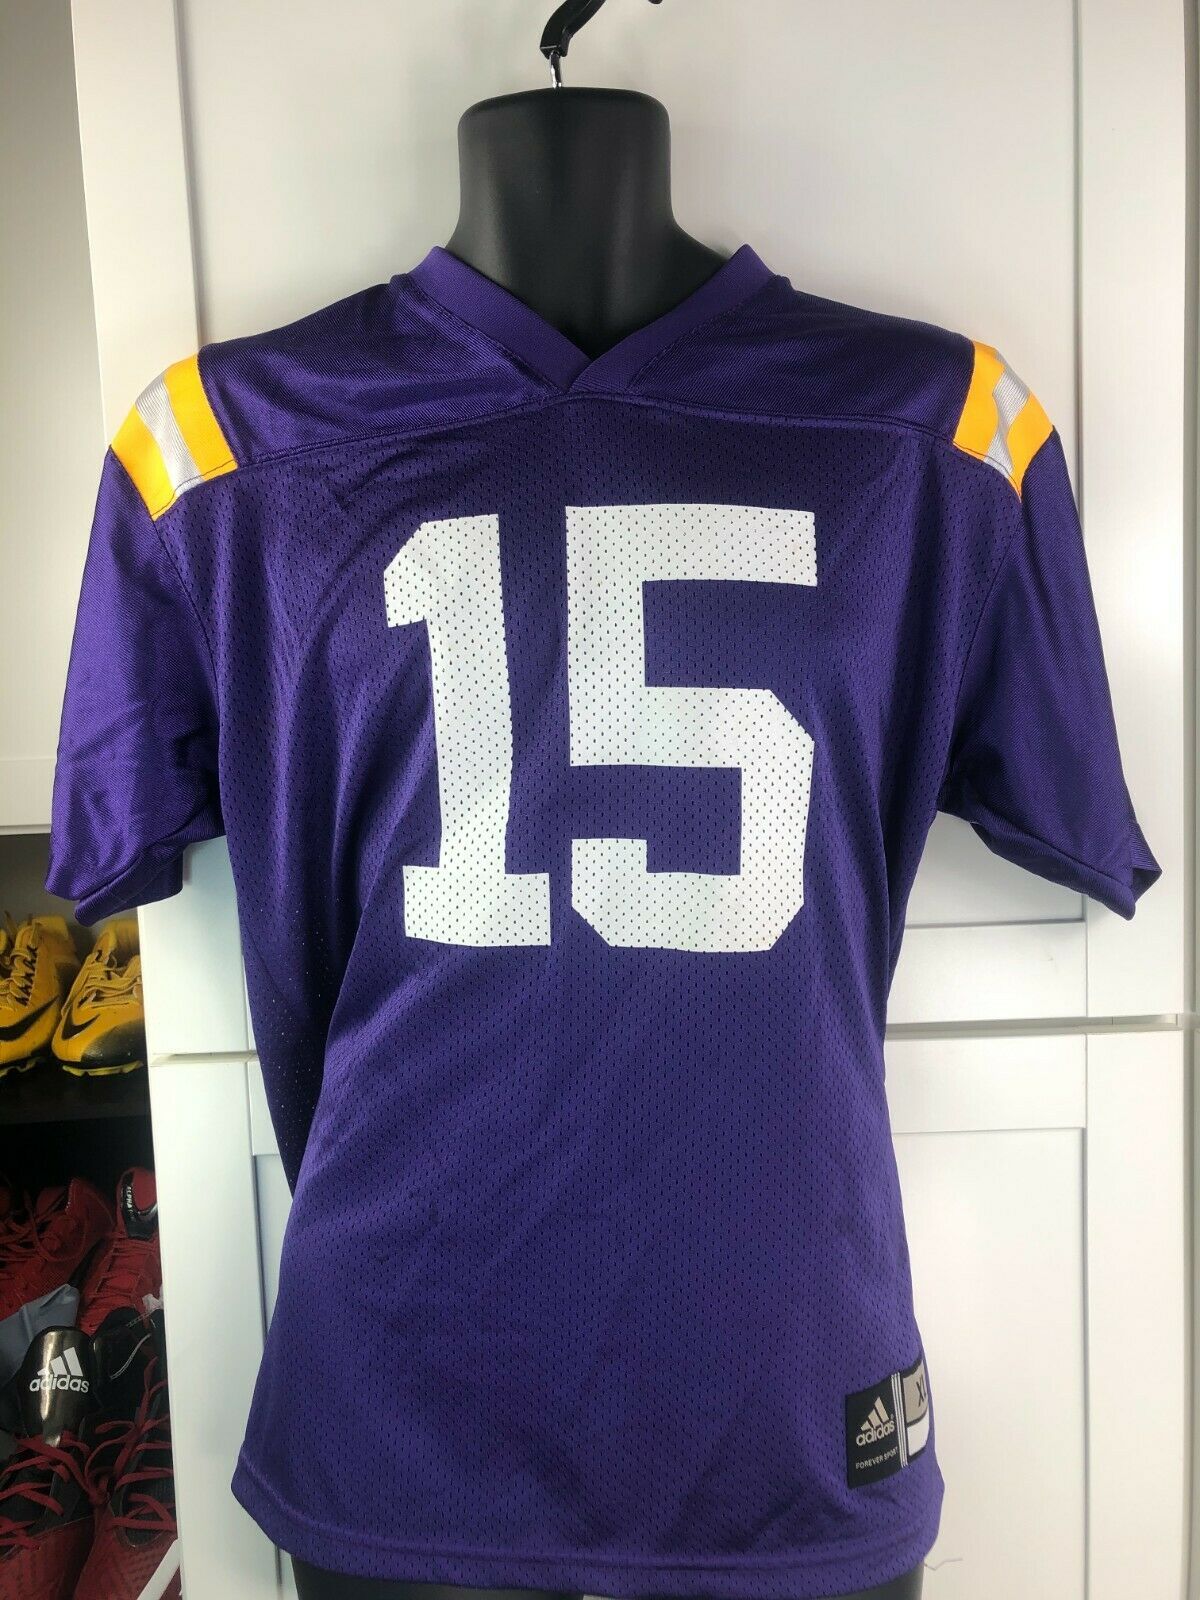 Primary image for LSU TIGERS FOOTBALL JERSEY- ADIDAS YOUTH EXTRA LARGE-BRAND NEW- RETAIL $55